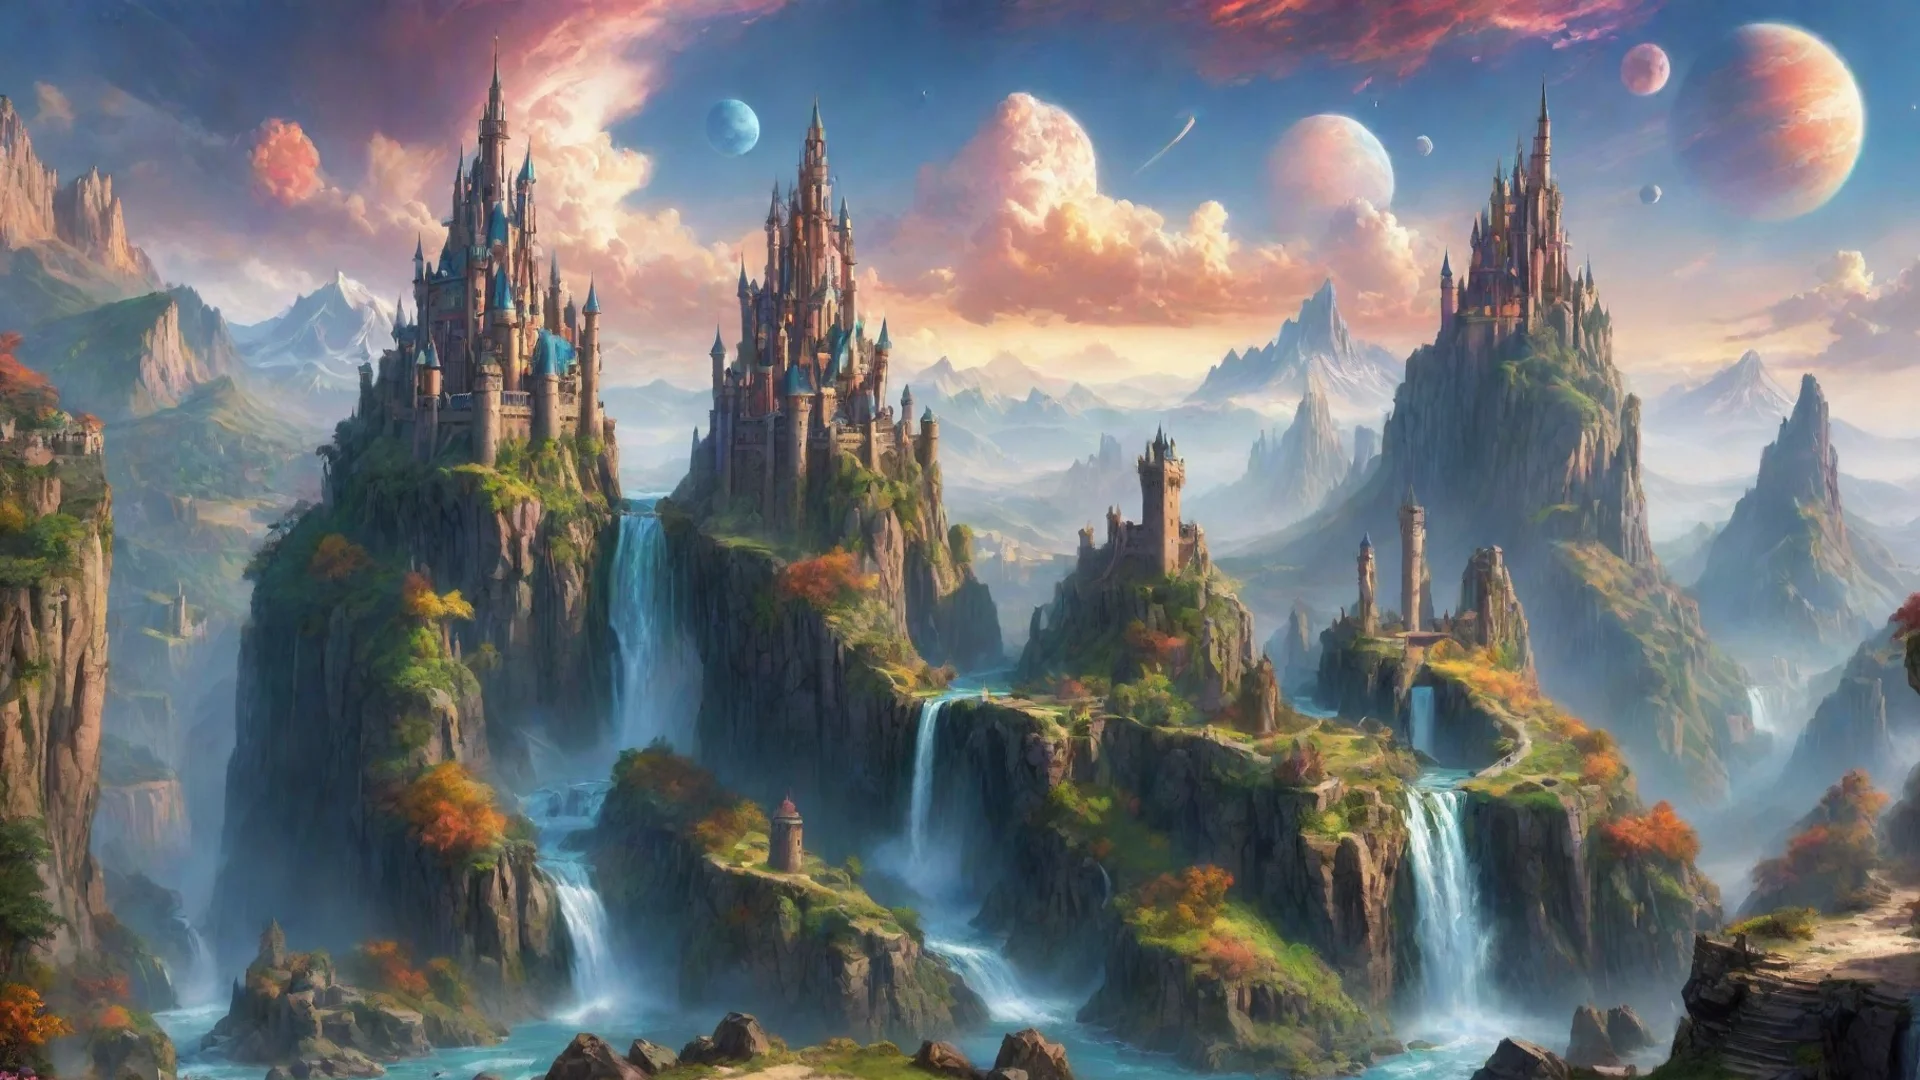 aiamazing scenery hd detailed colorful planets in sky realistic castles spiral towers high cliffs waterfalls beautiful wonderful aesthetic wide